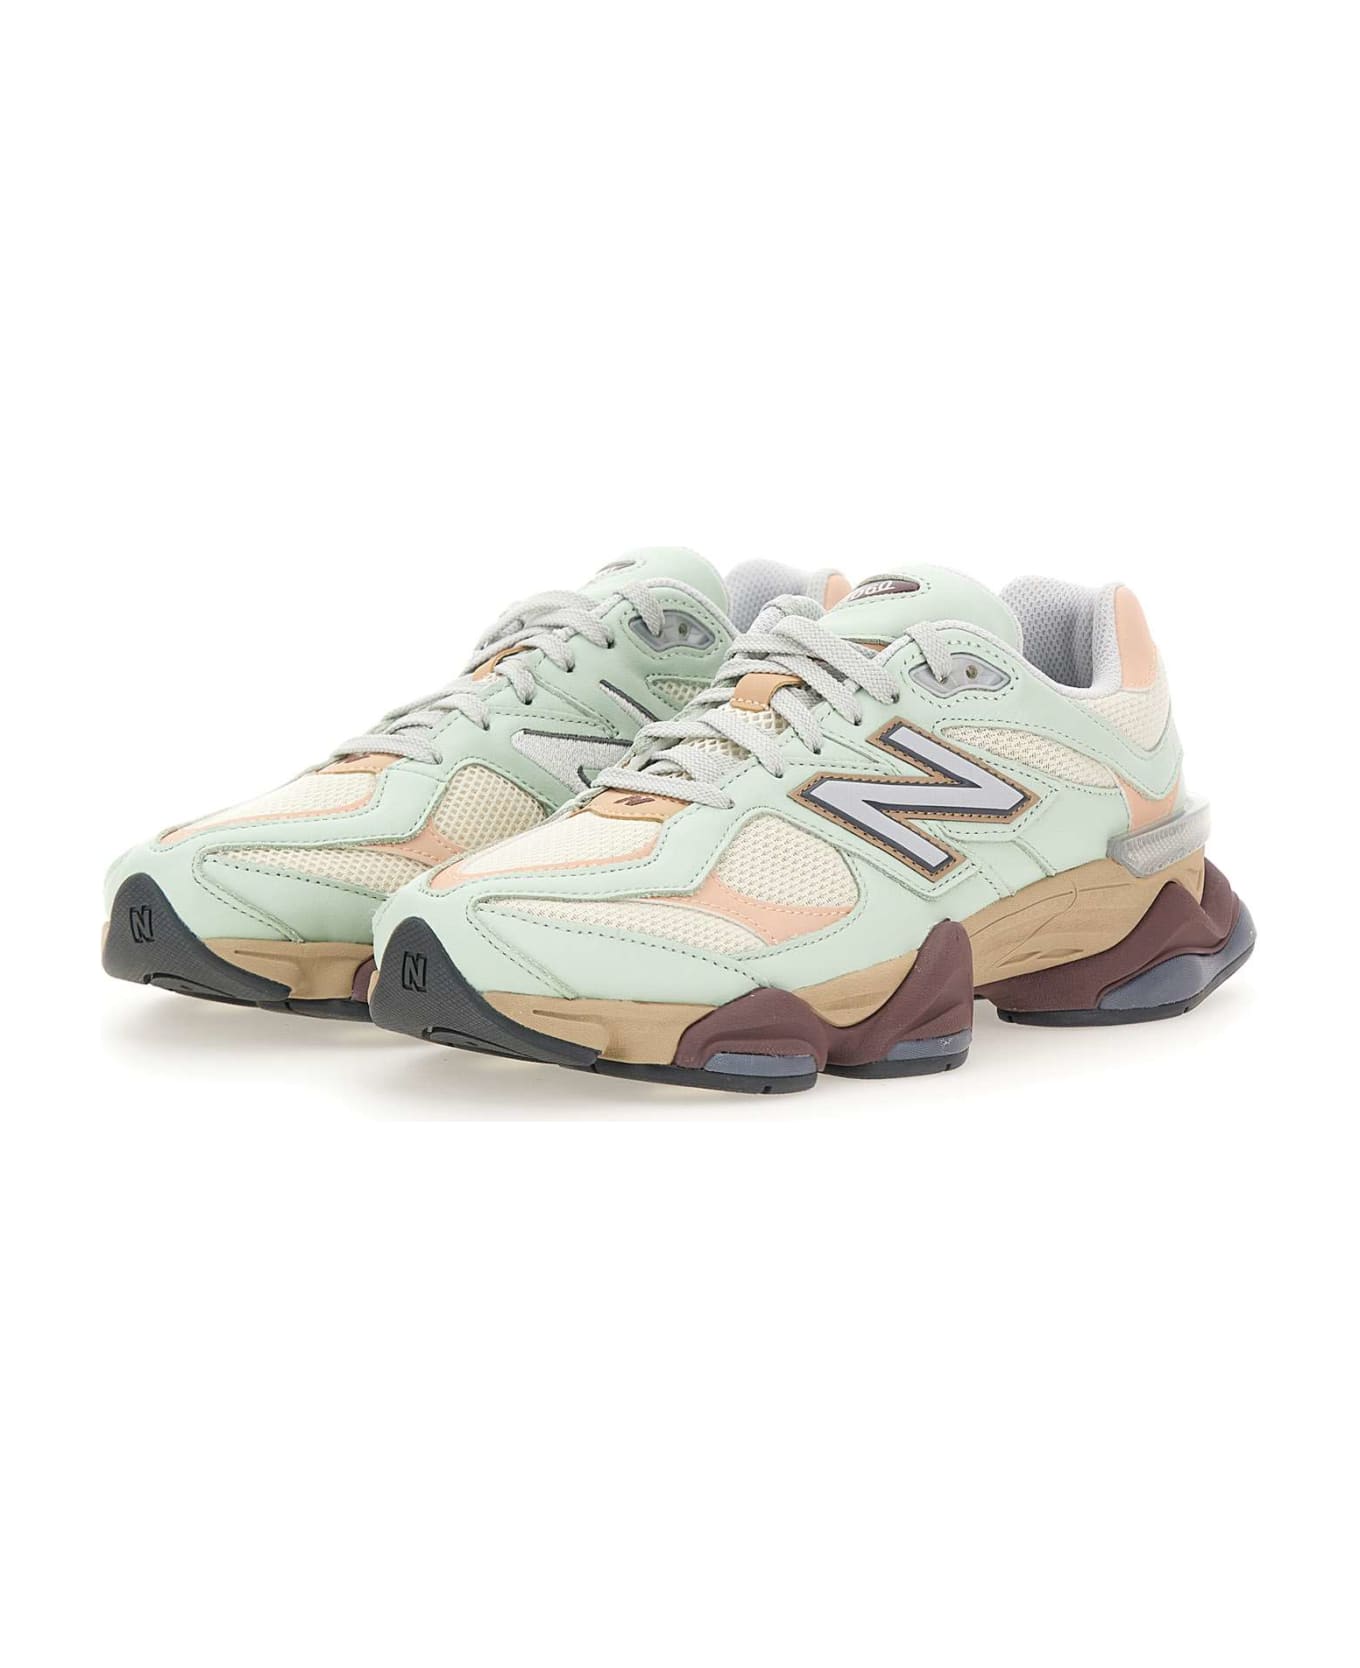 New Balance "9060" Sneakers - WHITE